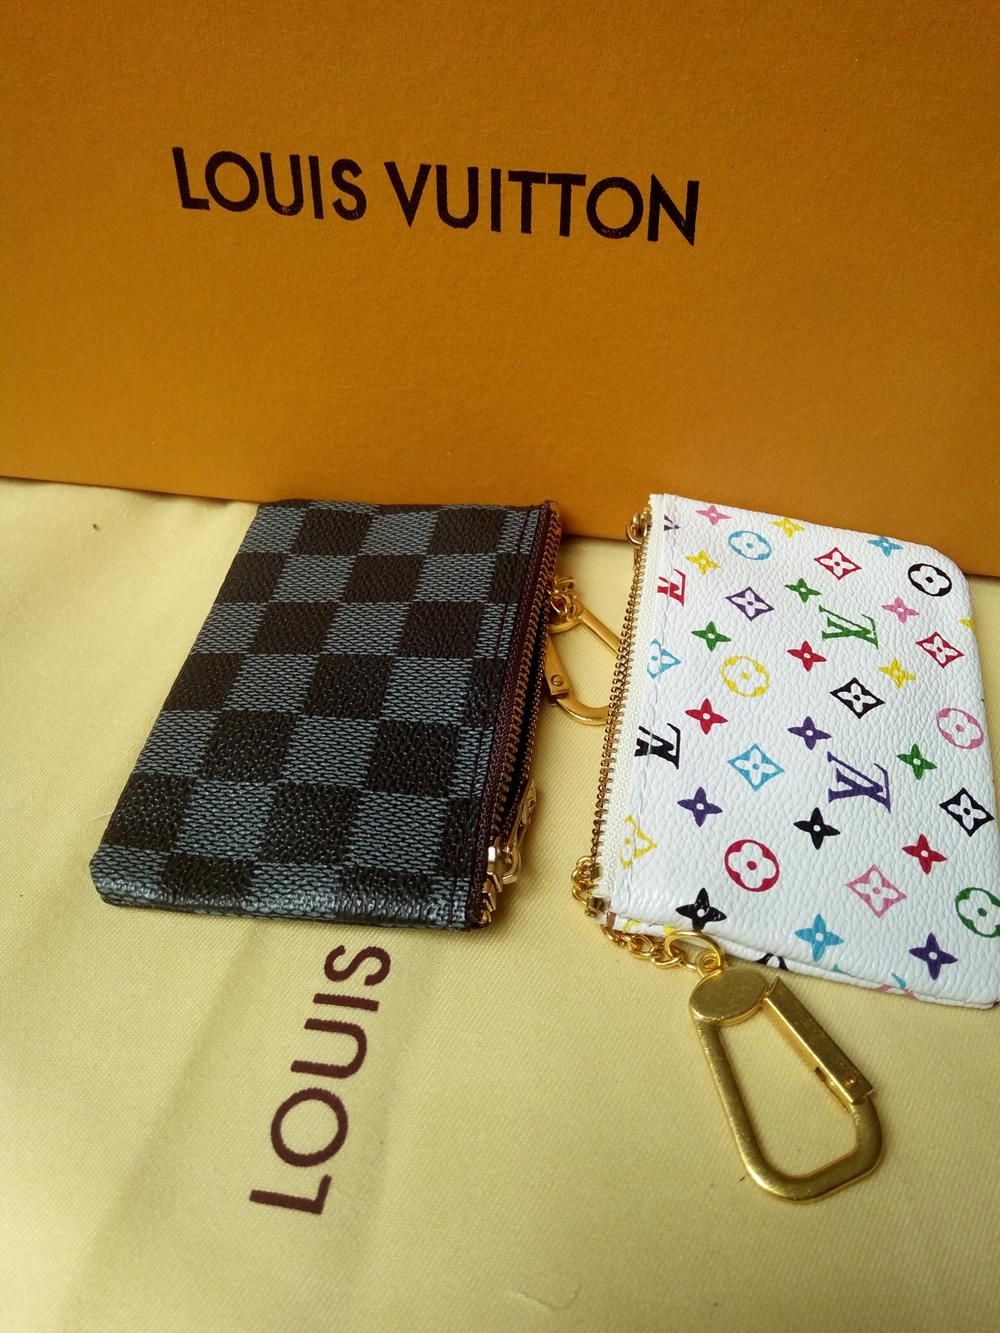 OUCHLouisVuitton Best Damier Canvas Holds Famous Classical  Design Women 6 Key Holder Coin Purse Without Box From Sny6661, $2.01